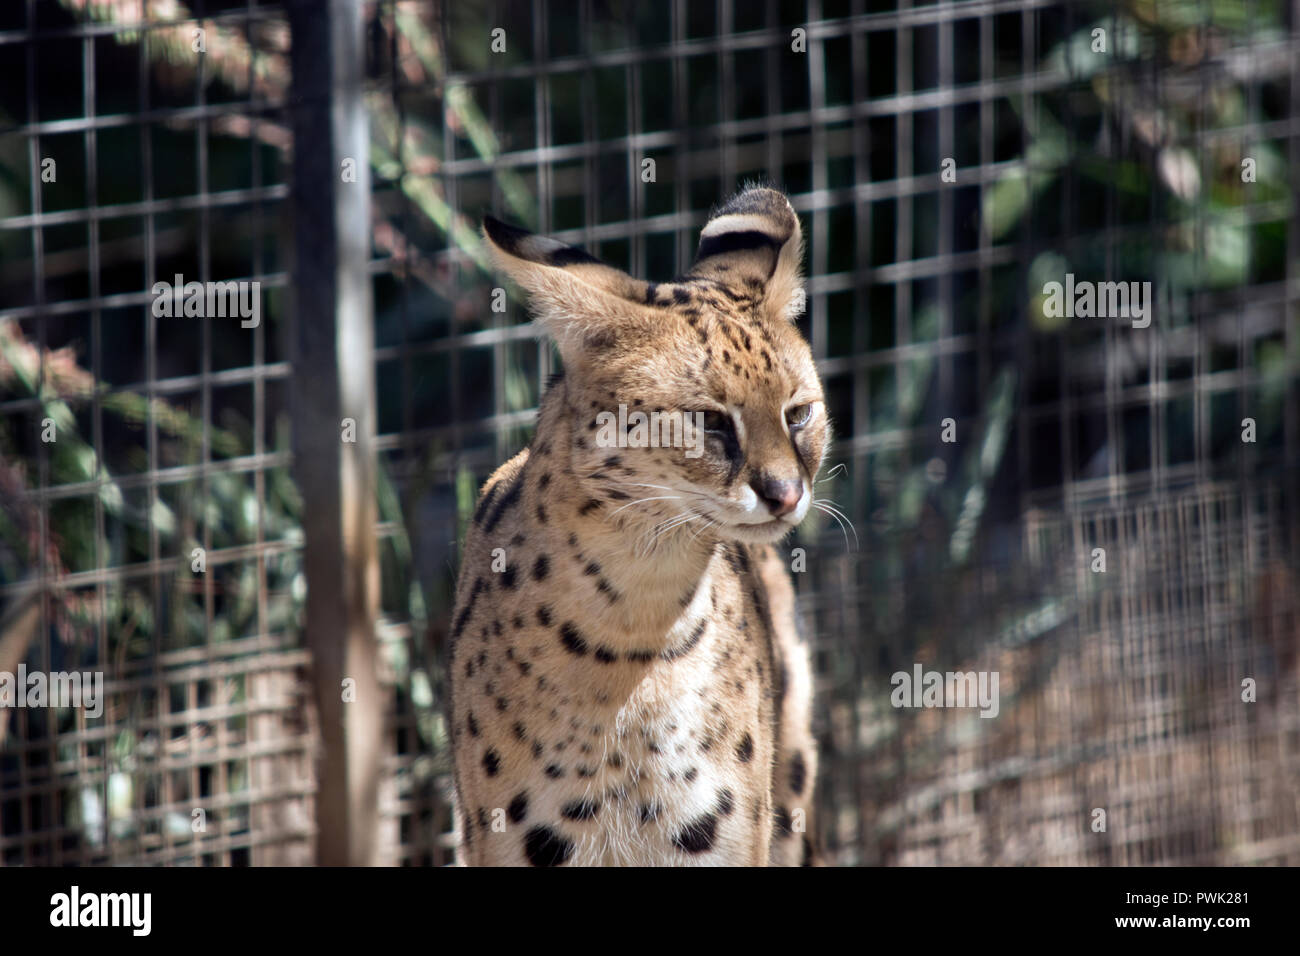 the several is a sleek spotted cat with whiskers Stock Photo